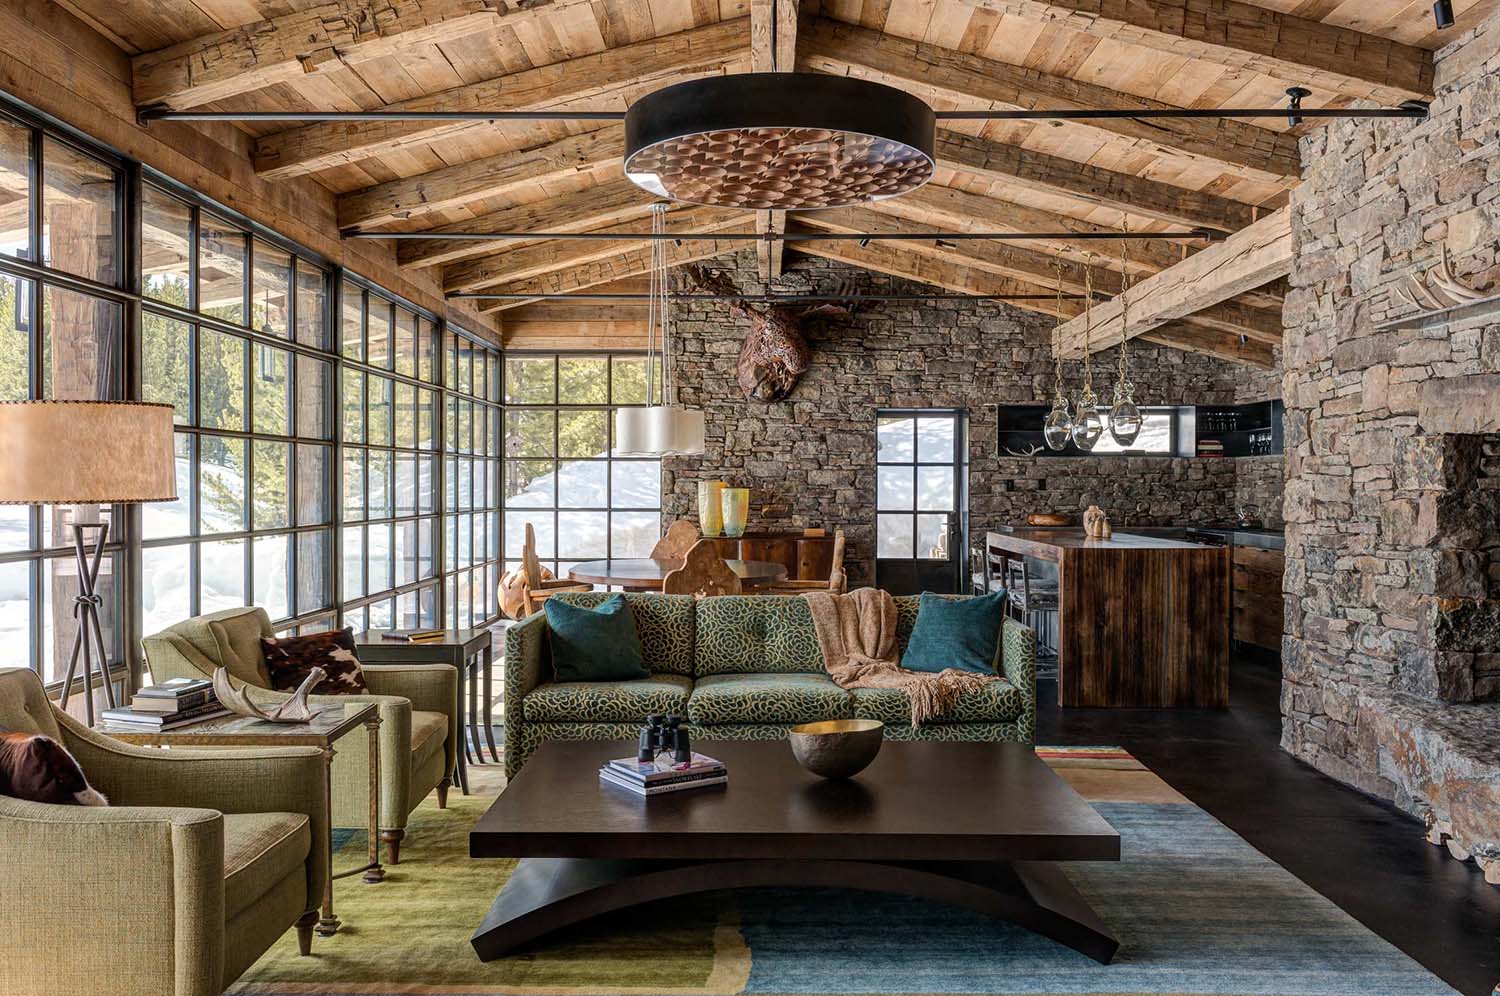 15 Rustic Home Decor Ideas for Your Living Room